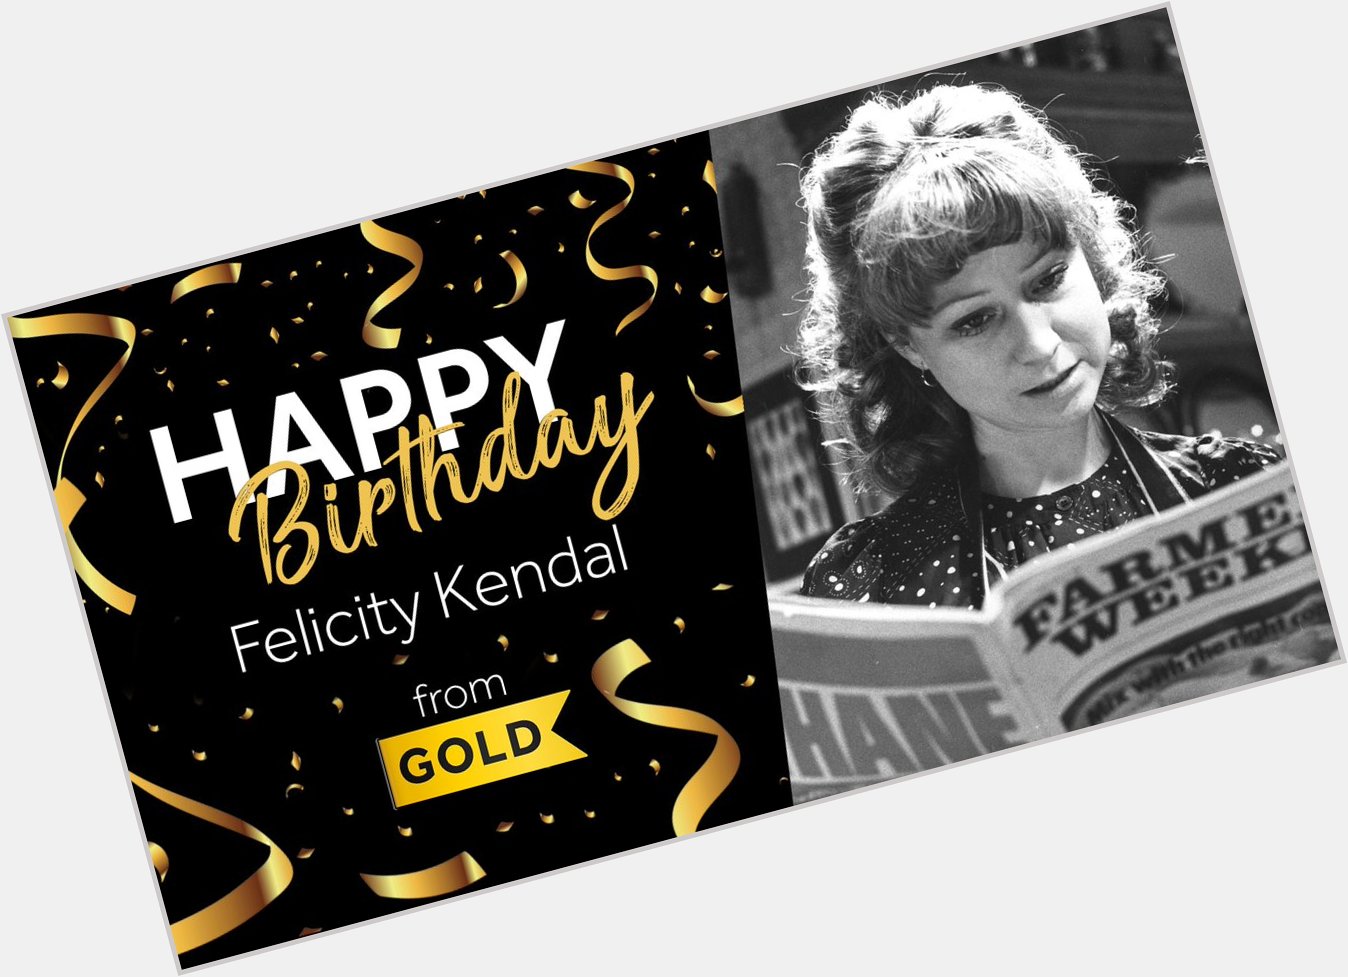 Always living the good life... Join us in wishing the fantastic Felicity Kendal a very Happy Birthday! 